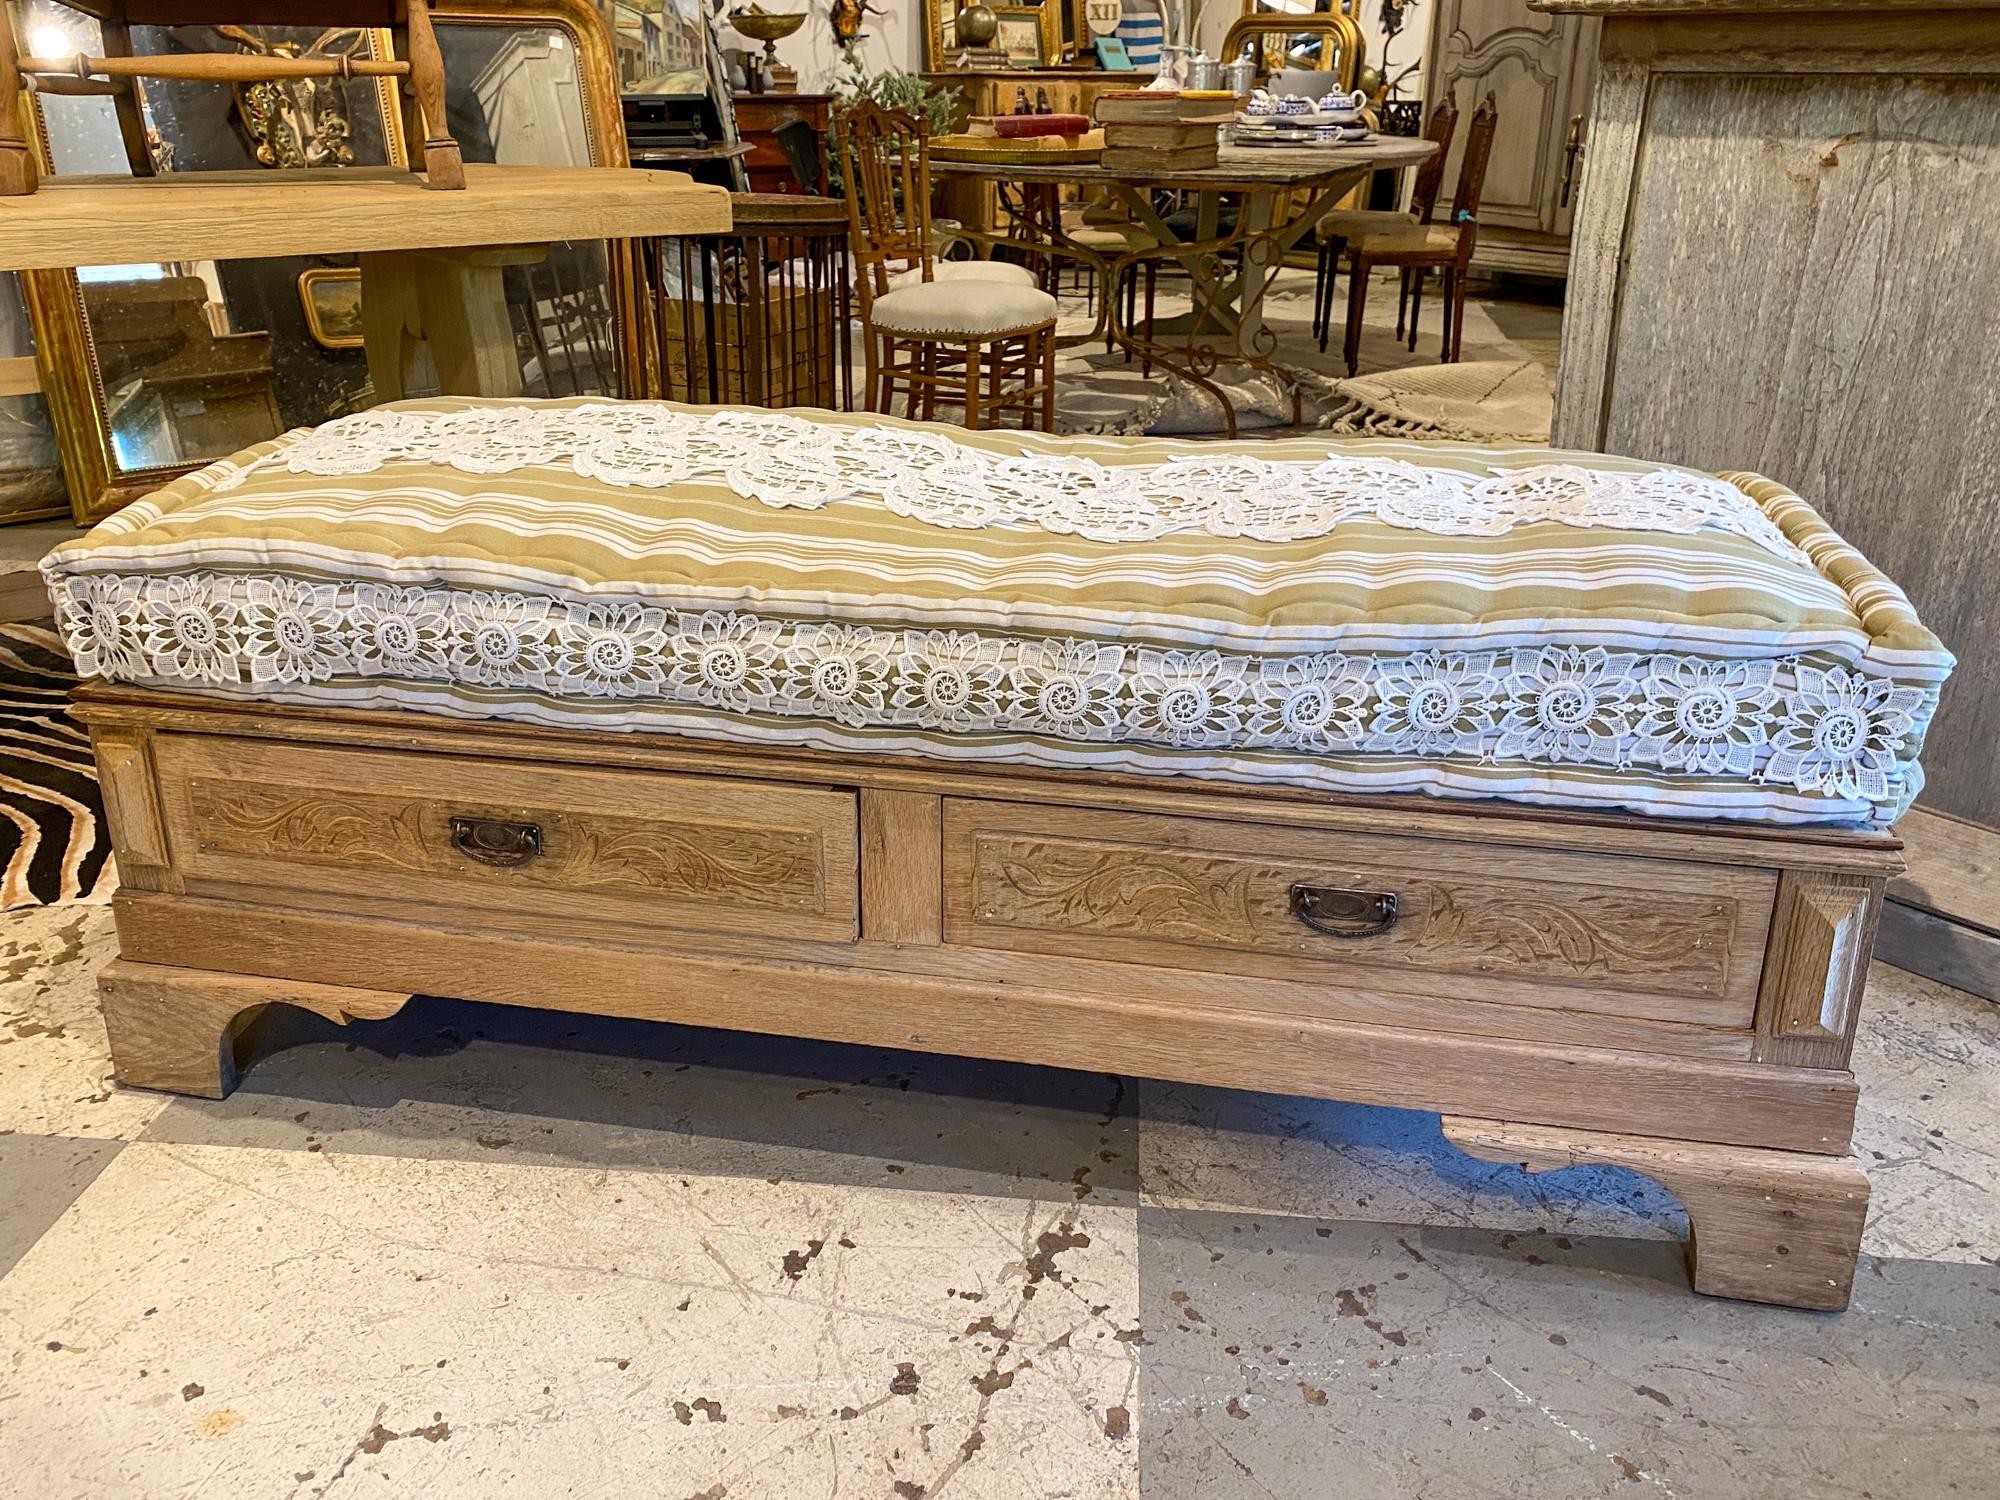 This multifunctional banquette bench was crafted by deconstructing a 19th century French Oak commode. The body of this piece dates to the 1880s, with two drawers and a newly added flat wood top. The original finish has been stripped and a cushion